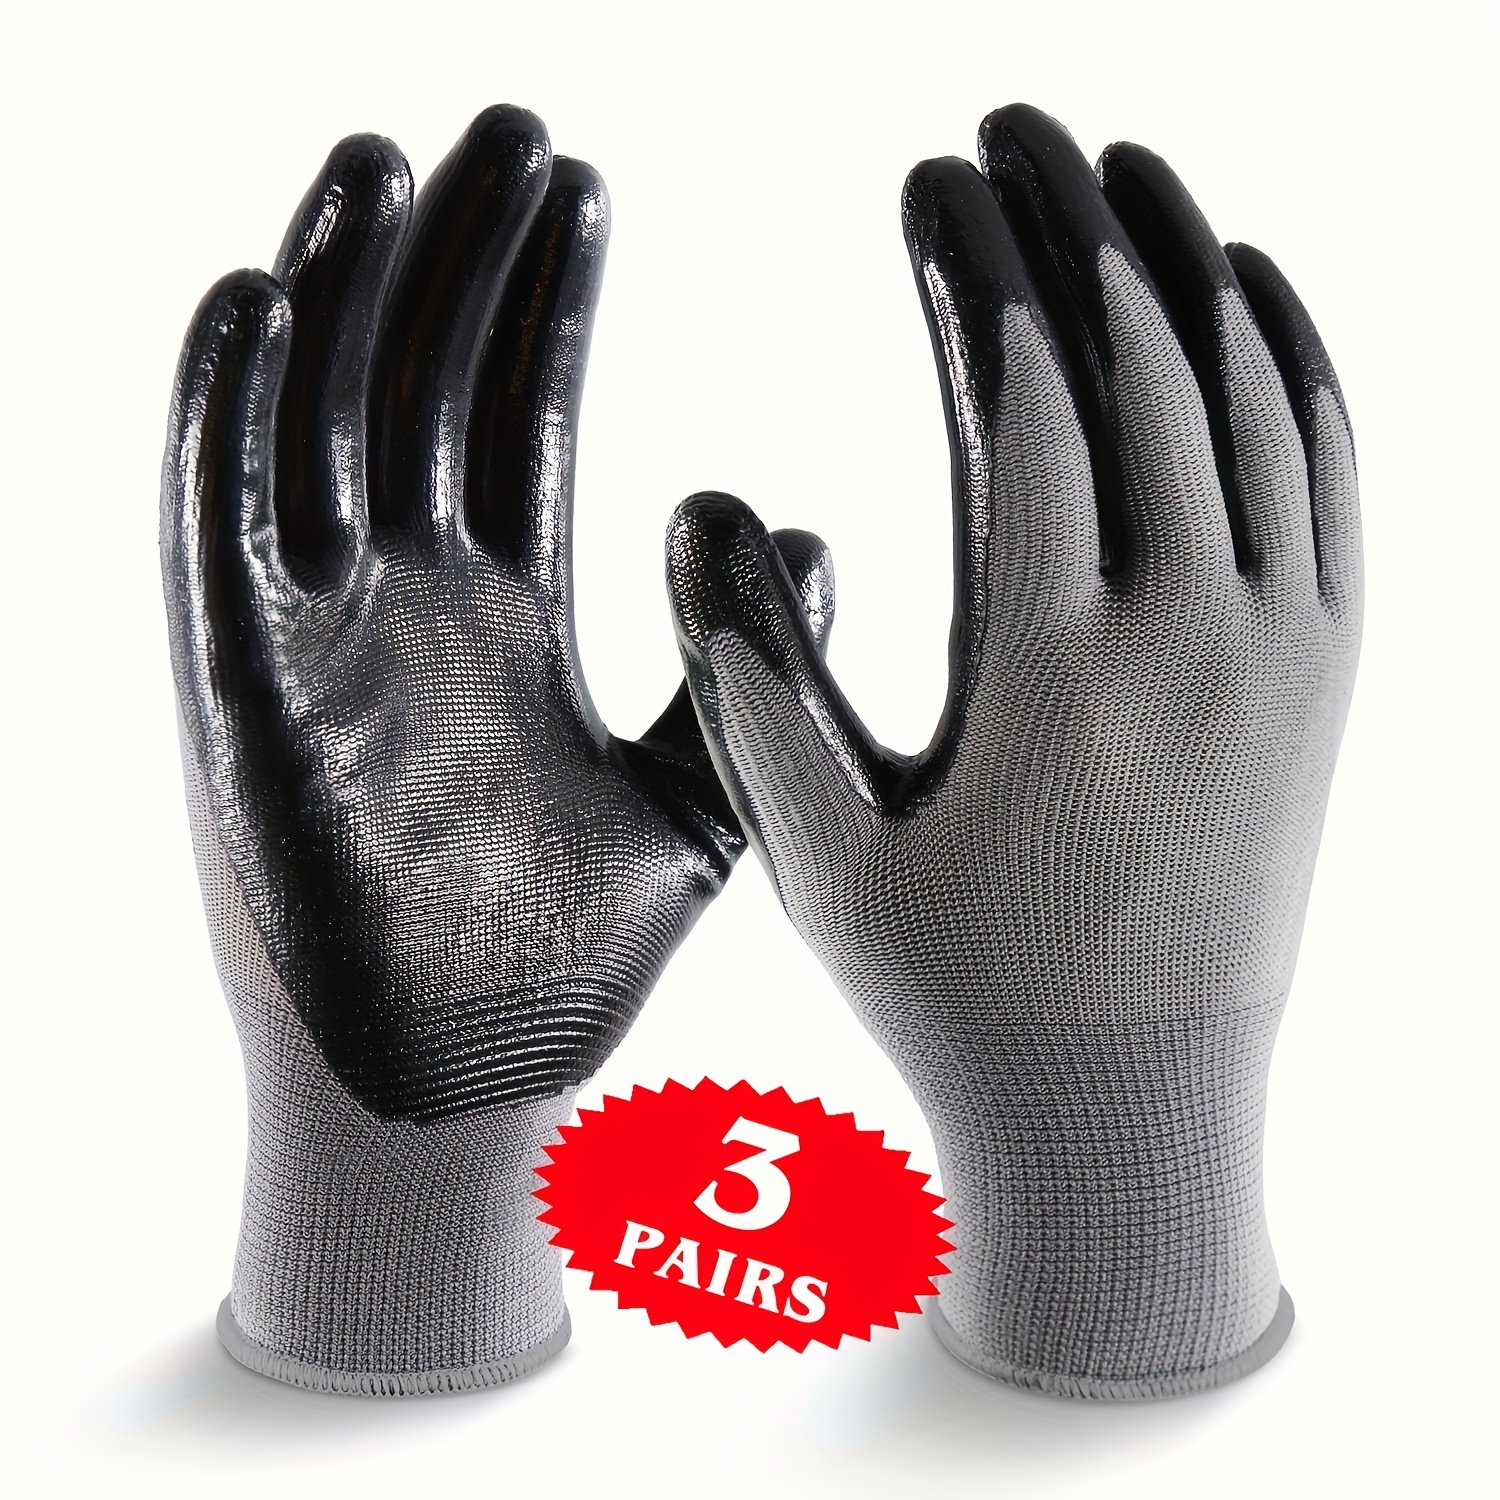 COOLJOB 3 Pairs Nitrile Coated Safety Work Gloves, Dots for Anti